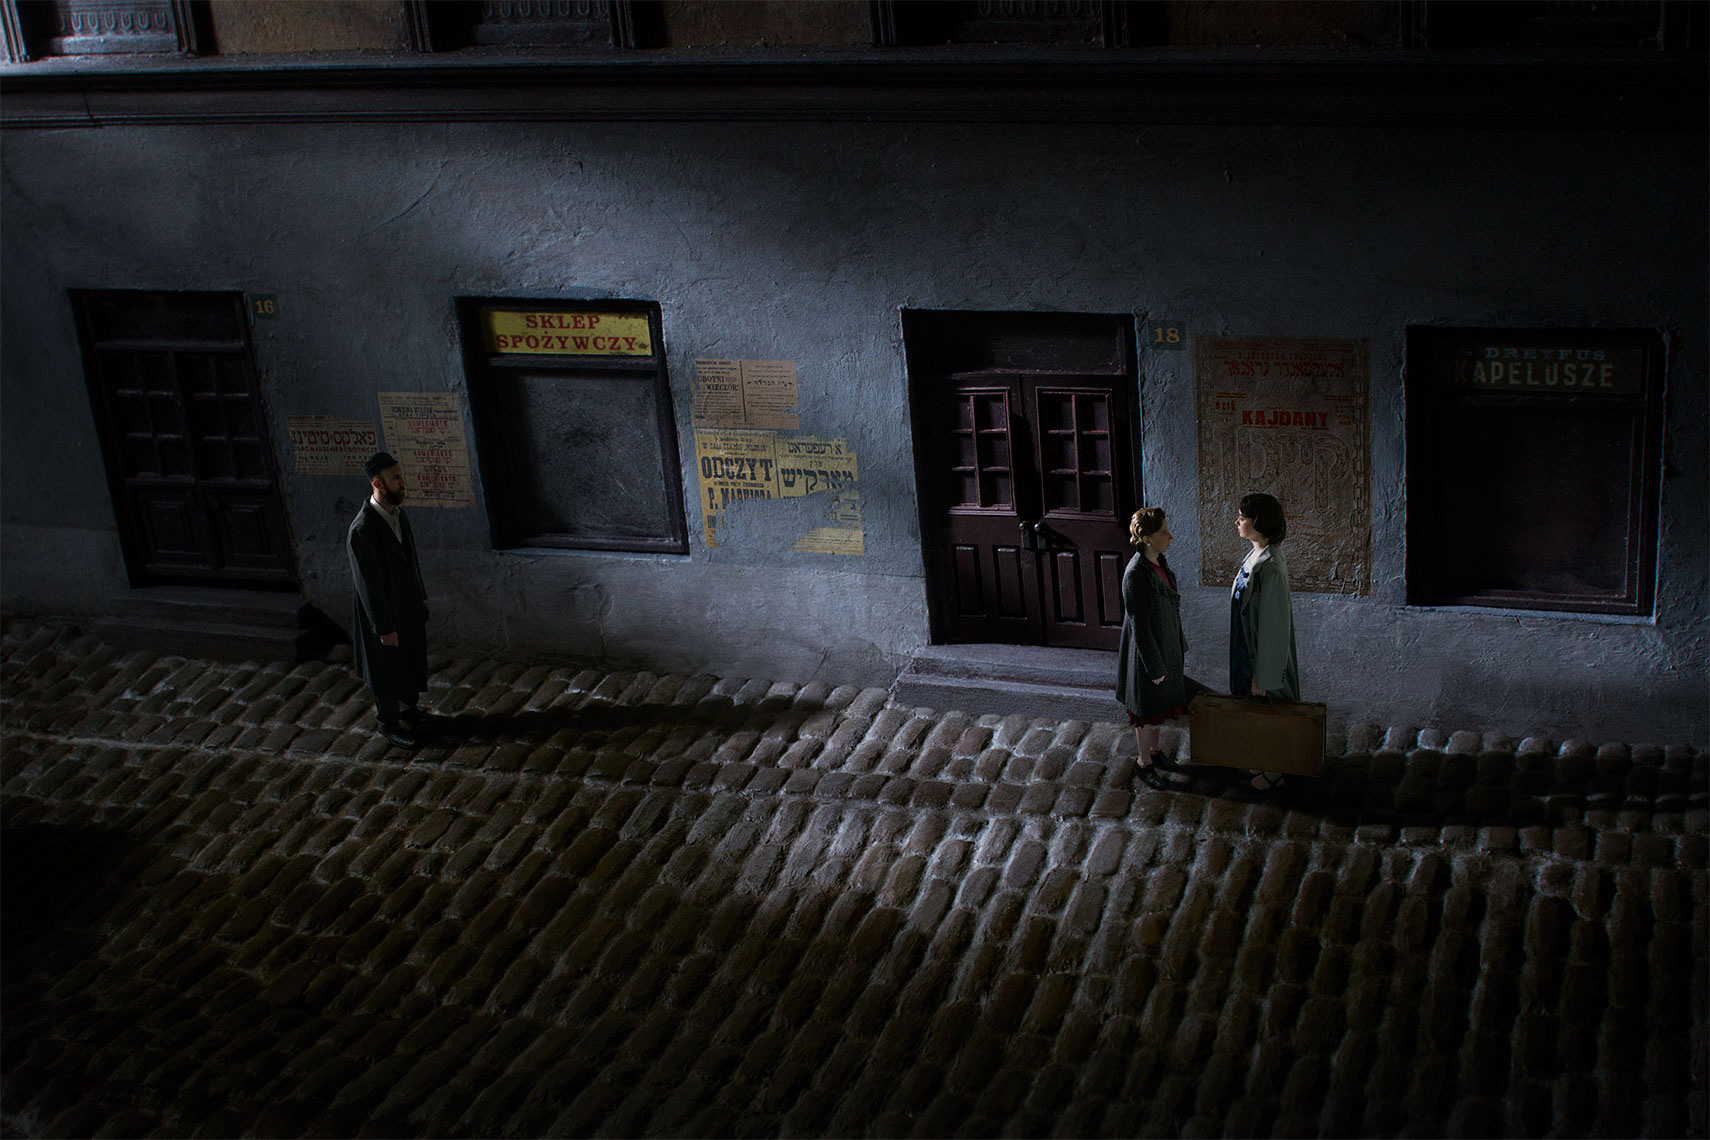 On a shadowy, dark, lonely Polish cobblestone street at night in 1930, two women, one carrying a suitcase, face each other in conversation, while ten feet away a bearded Orthodox Jewish man watches.